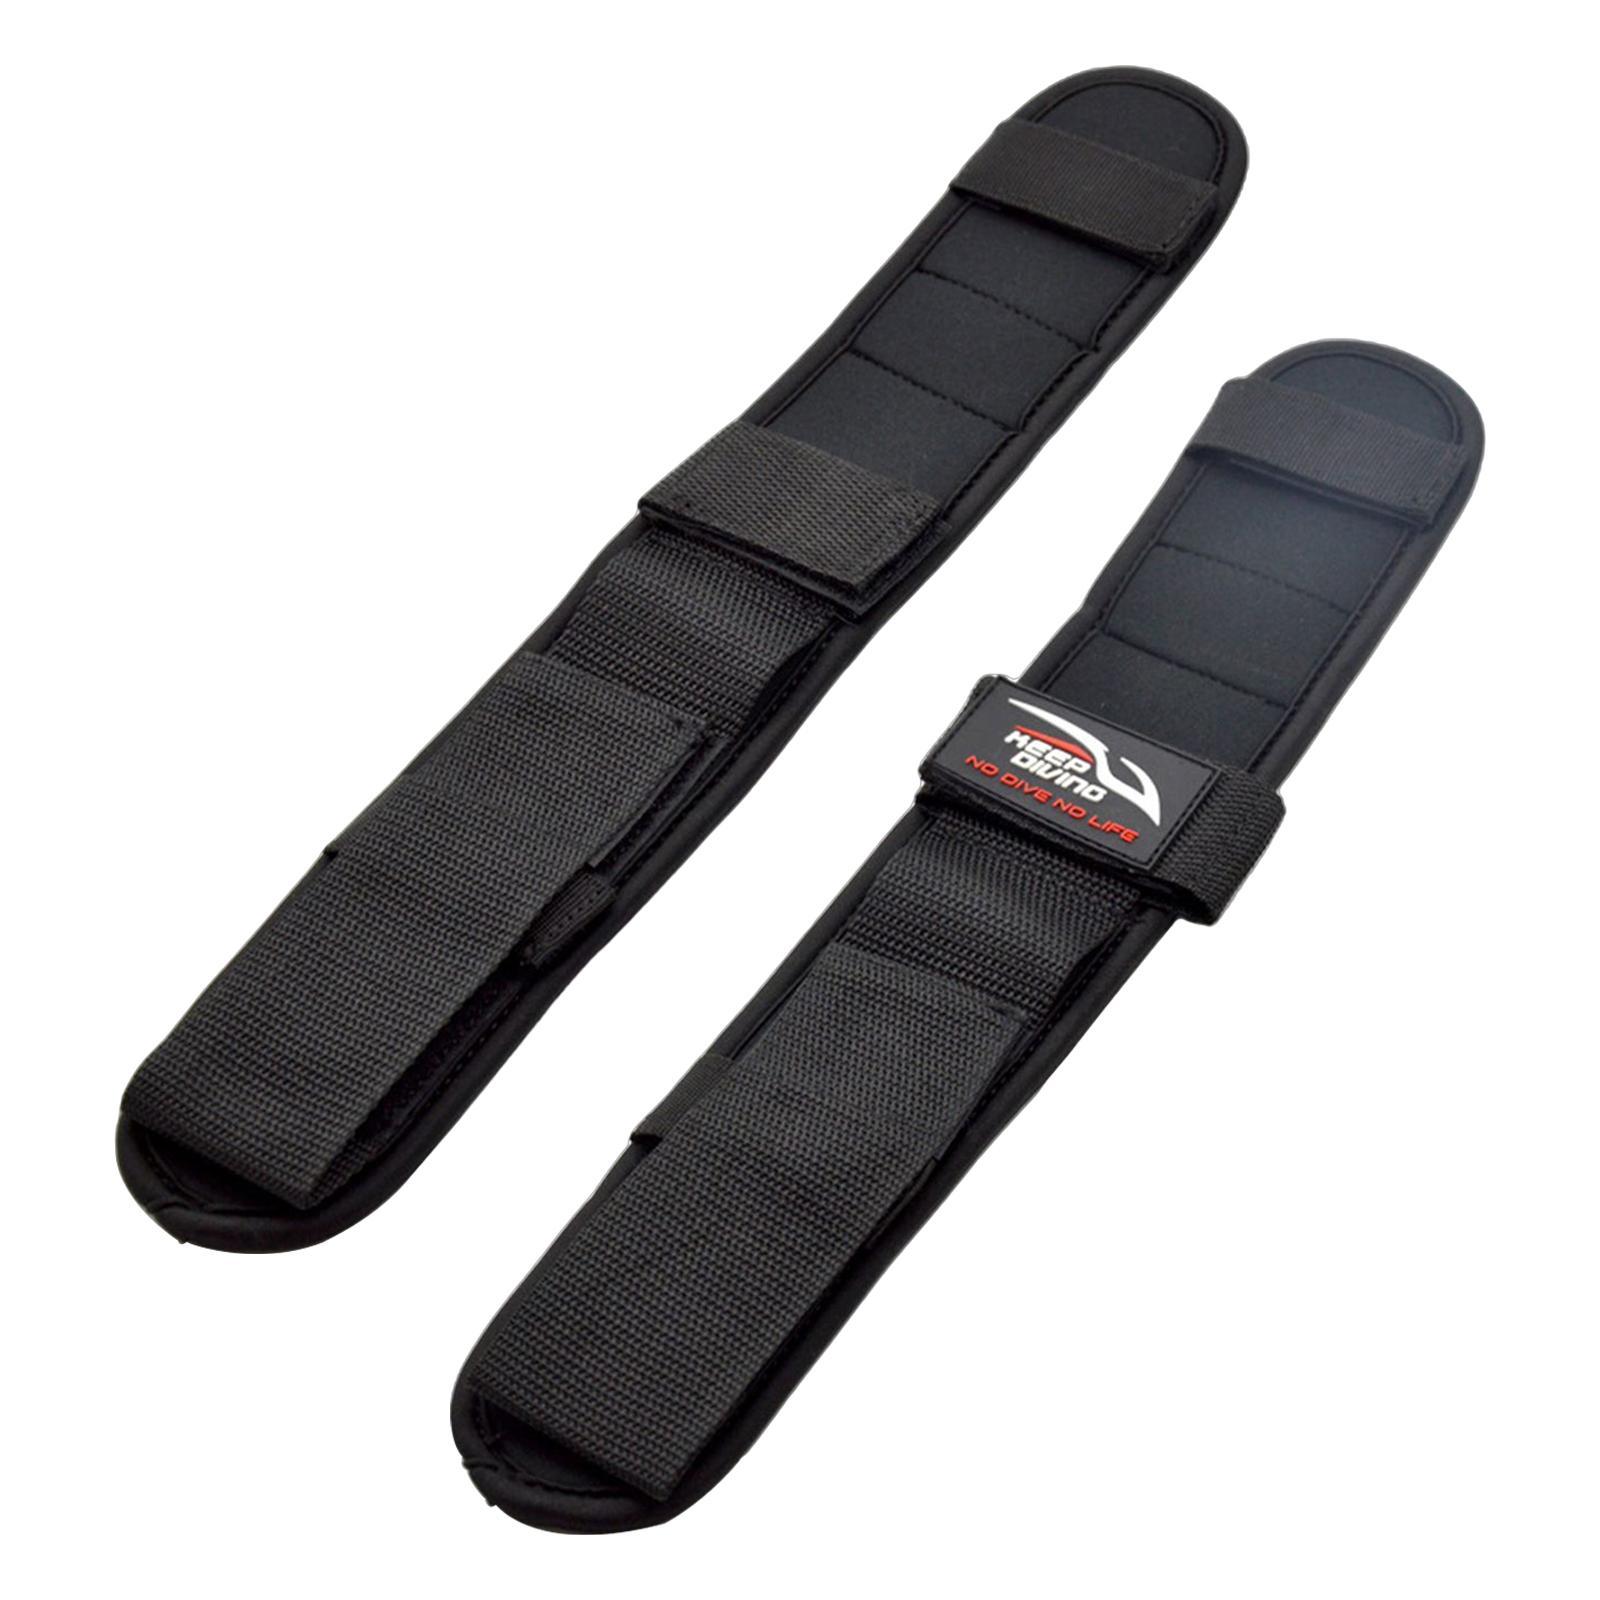 Adjustable Diving Backplate strap mat Durable Padded Deluxe Shoulder Straps Cushion Replace